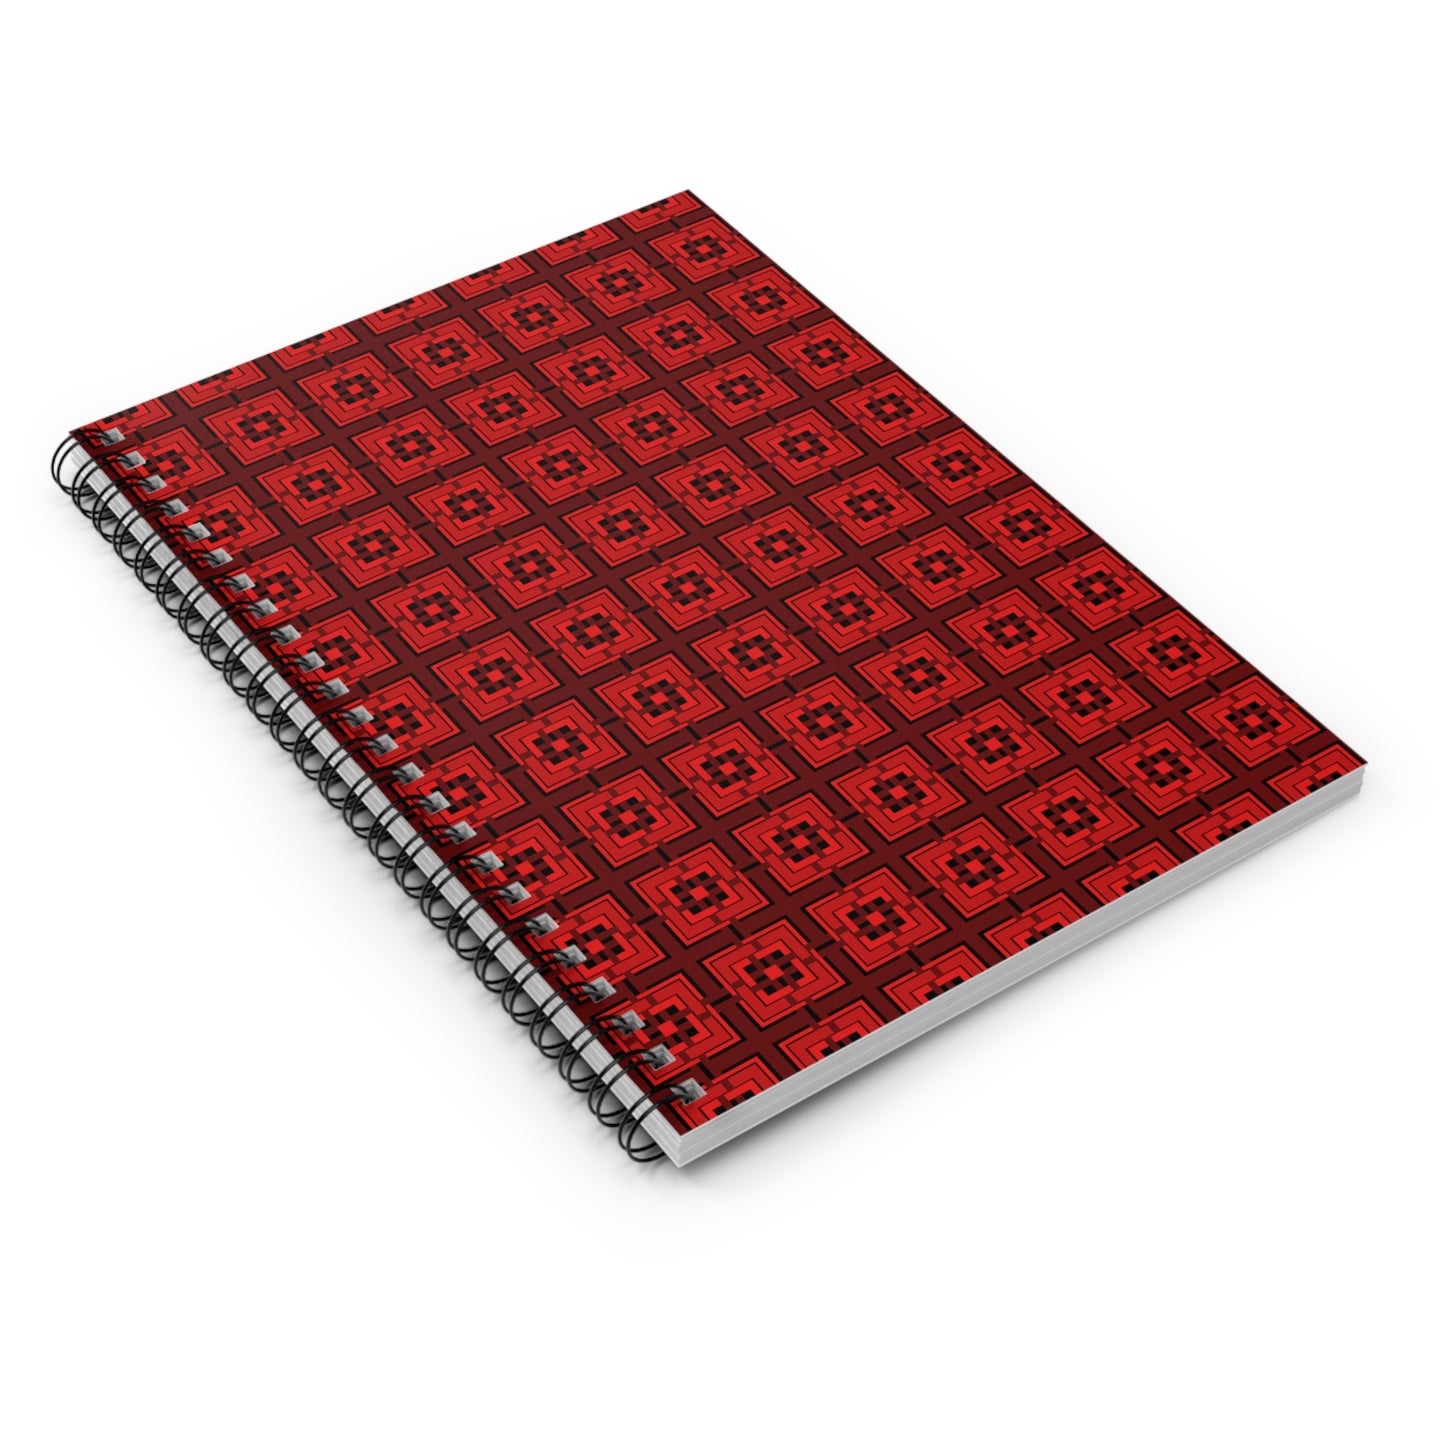 Intersecting Squares - Red - Black - Spiral Notebook - Ruled Line